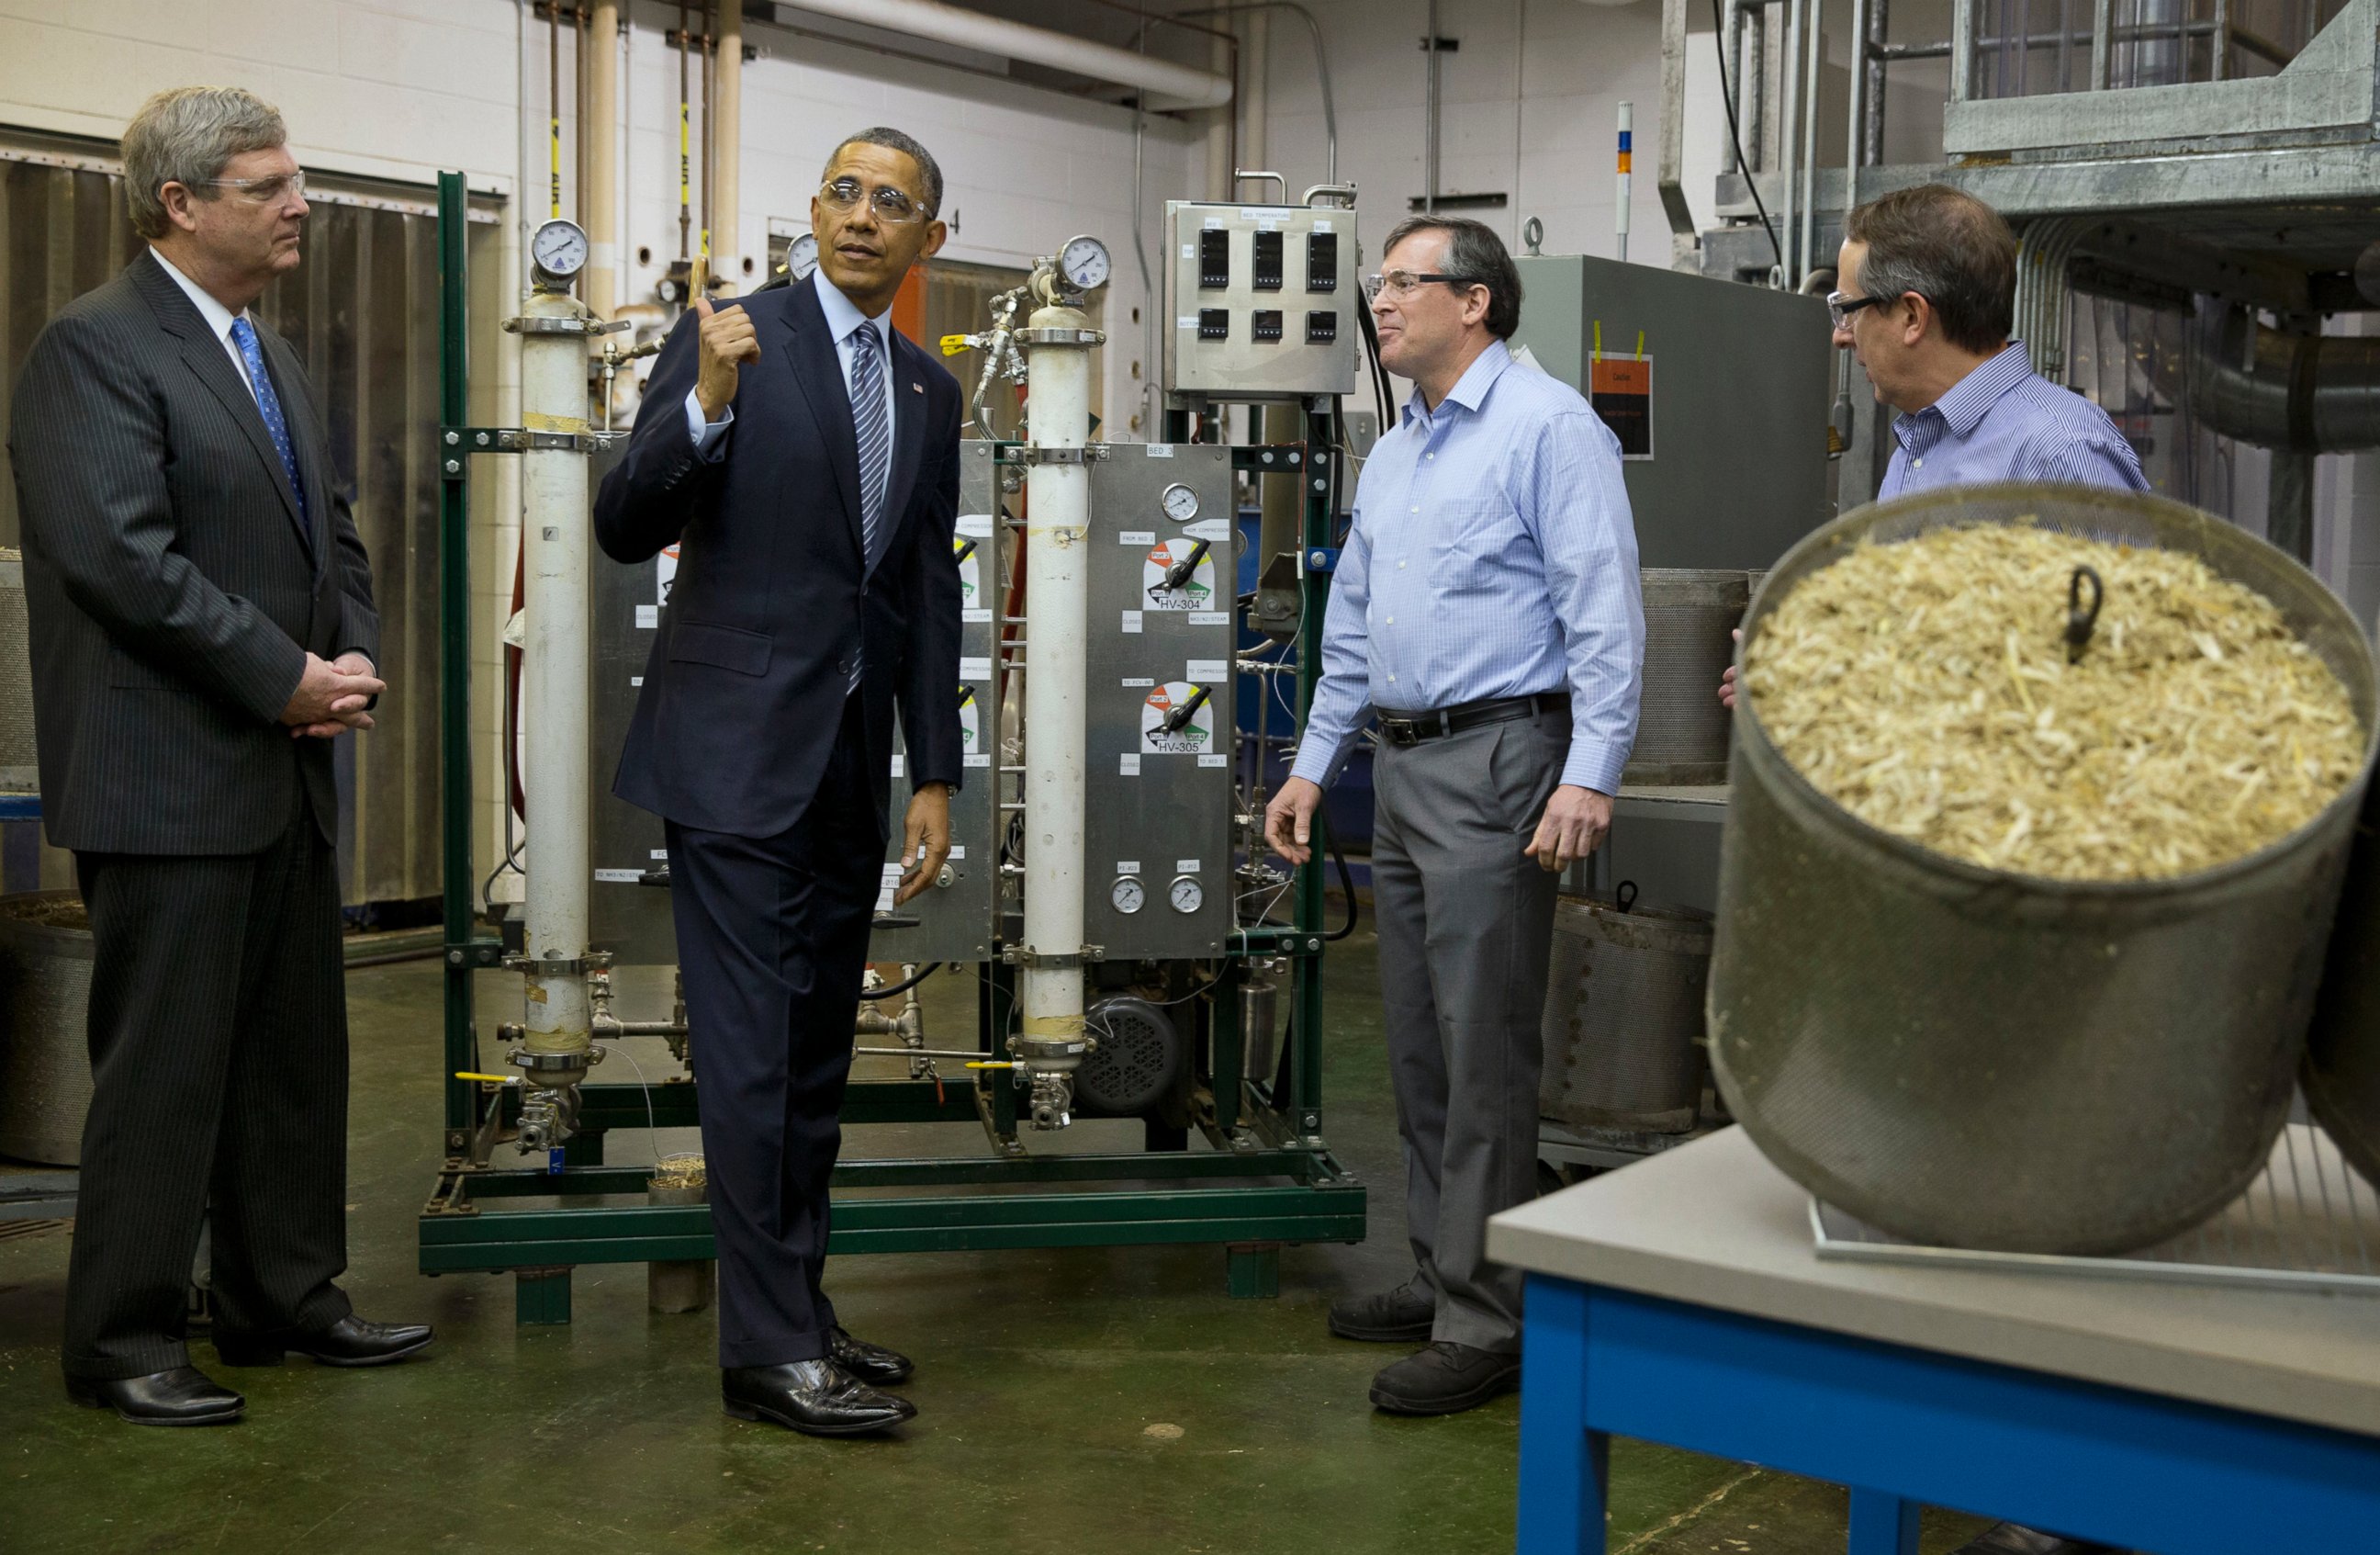 PHOTO: In this Feb. 7, 2014 file photo, Agriculture Secretary Tom Vilsack, left, and President Barack Obama, tour the biomass conversion process area at Michigan State University.